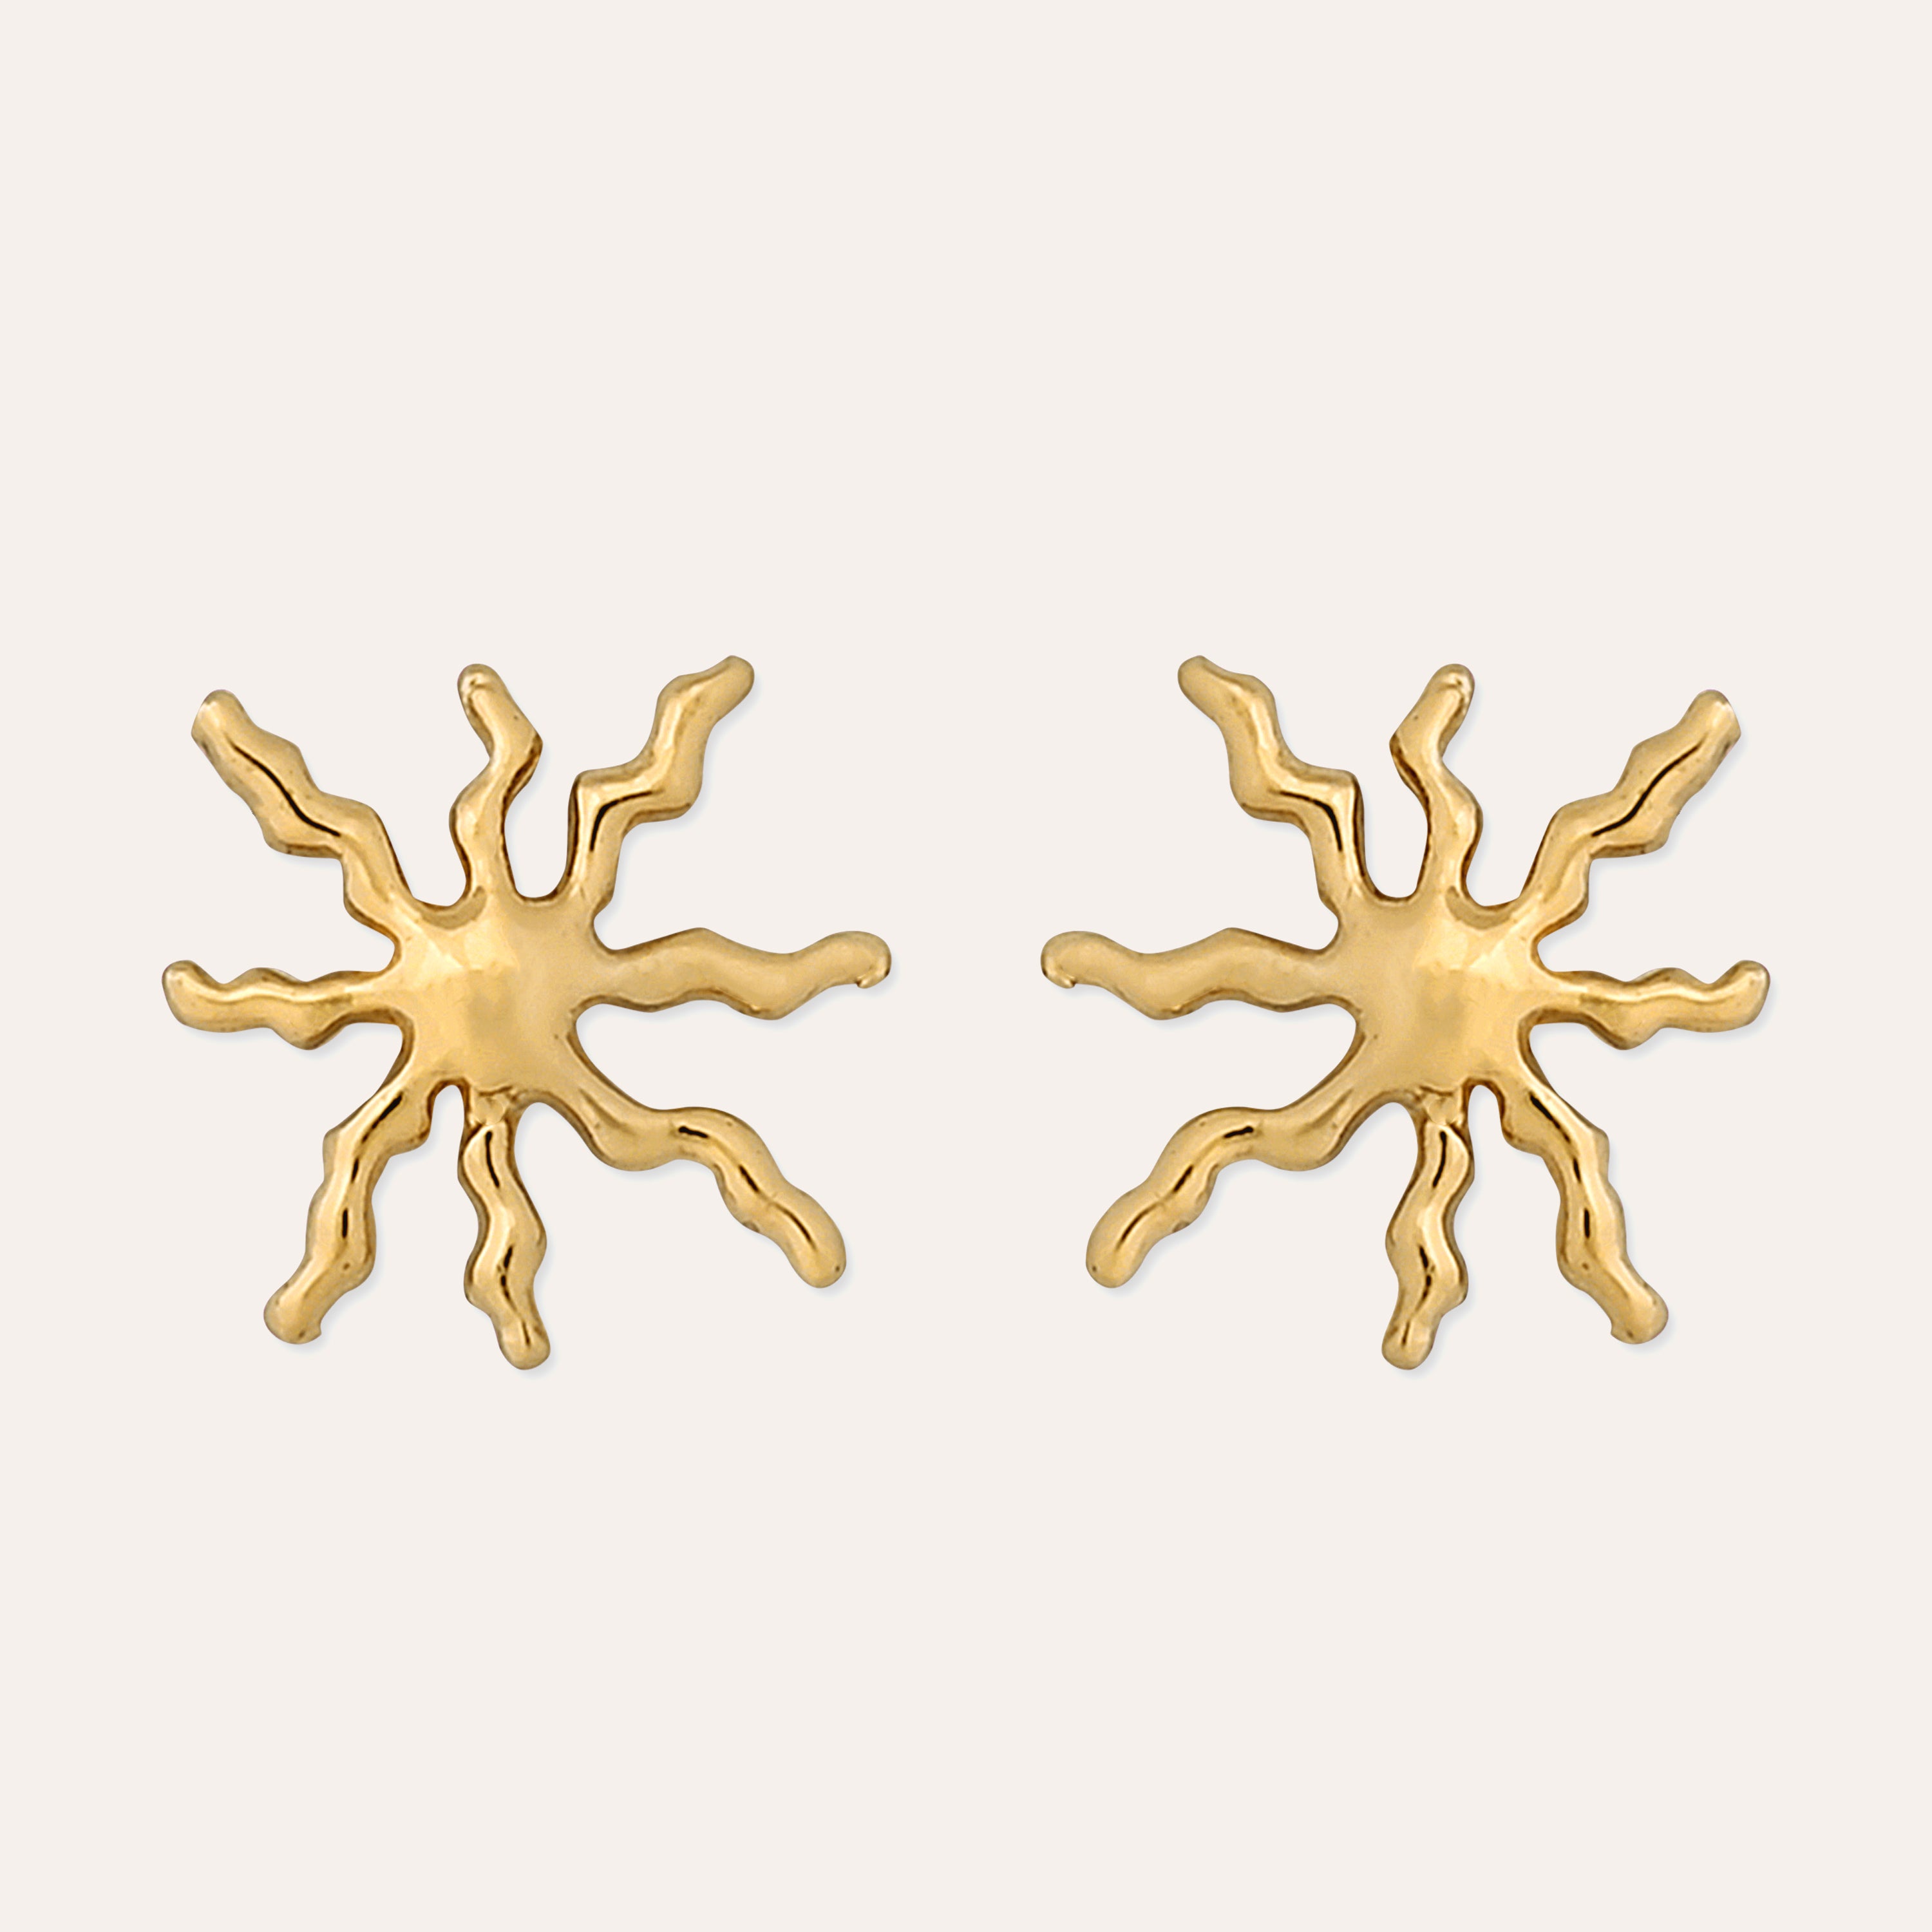 TFC Sunnyday Gold Plated Dangler Earrings-Discover daily wear gold earrings including stud earrings, hoop earrings, and pearl earrings, perfect as earrings for women and earrings for girls.Find the cheapest fashion jewellery which is anti-tarnis​h only at The Fun company